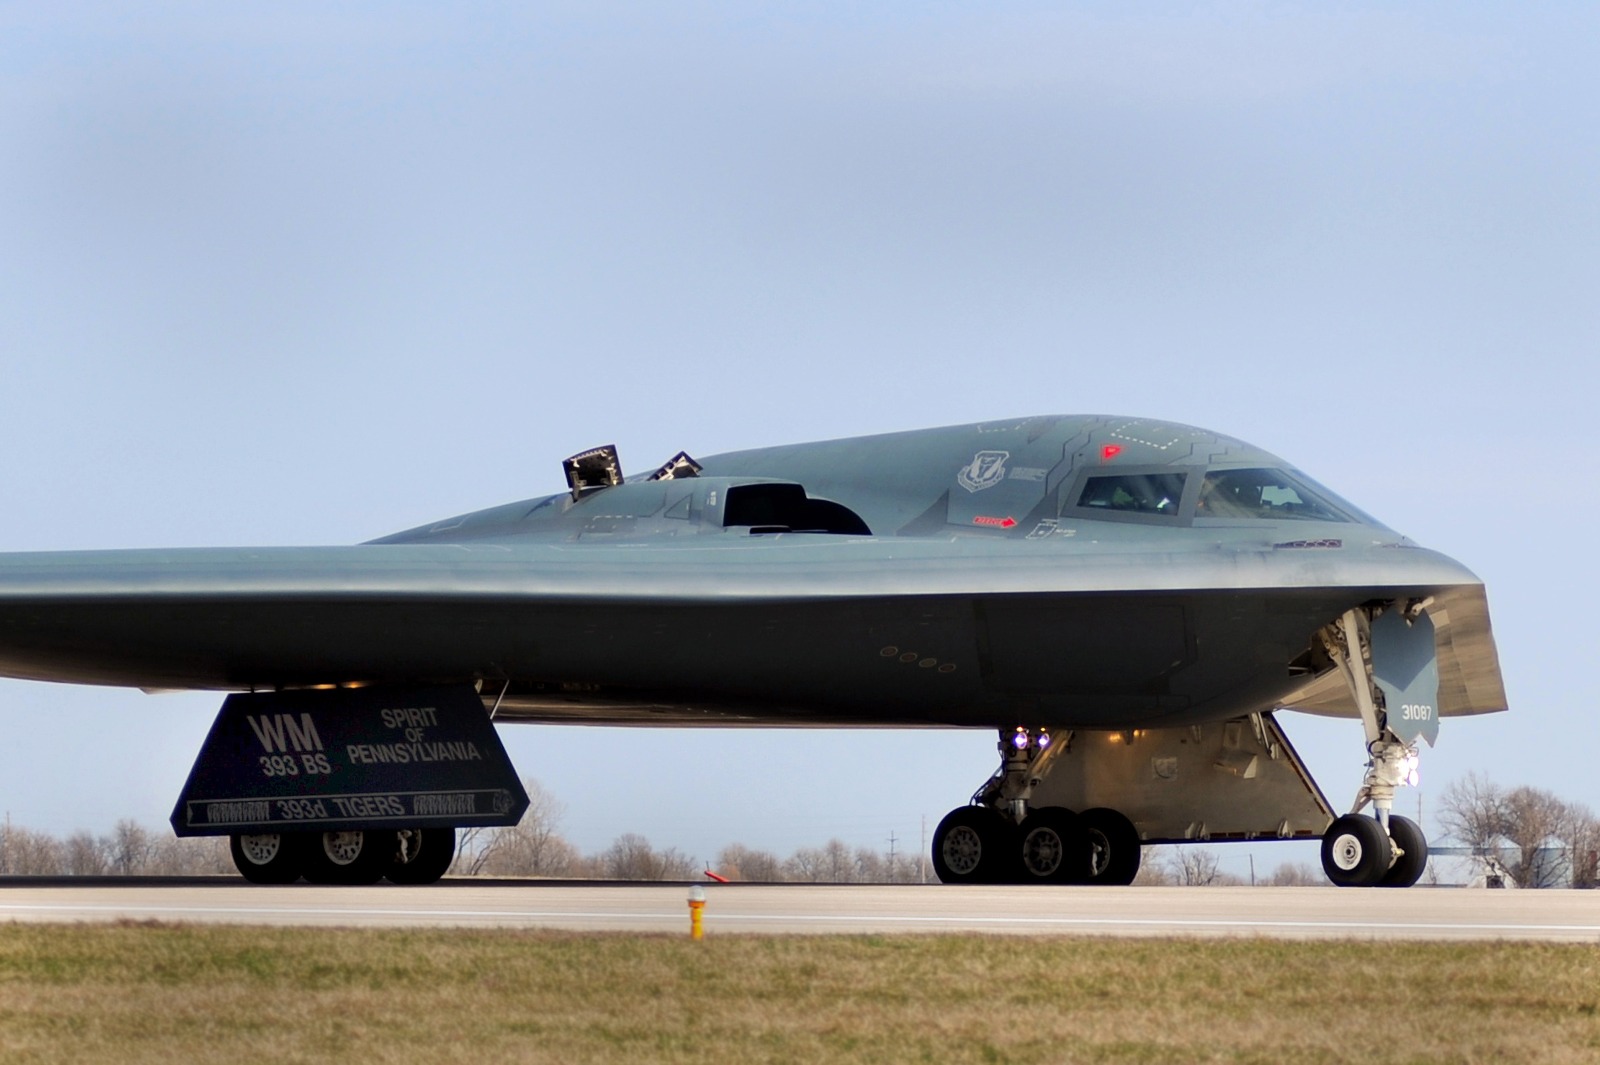 The U.S. Air Force's B-21 Long-Range Stealth Bomber Might Be